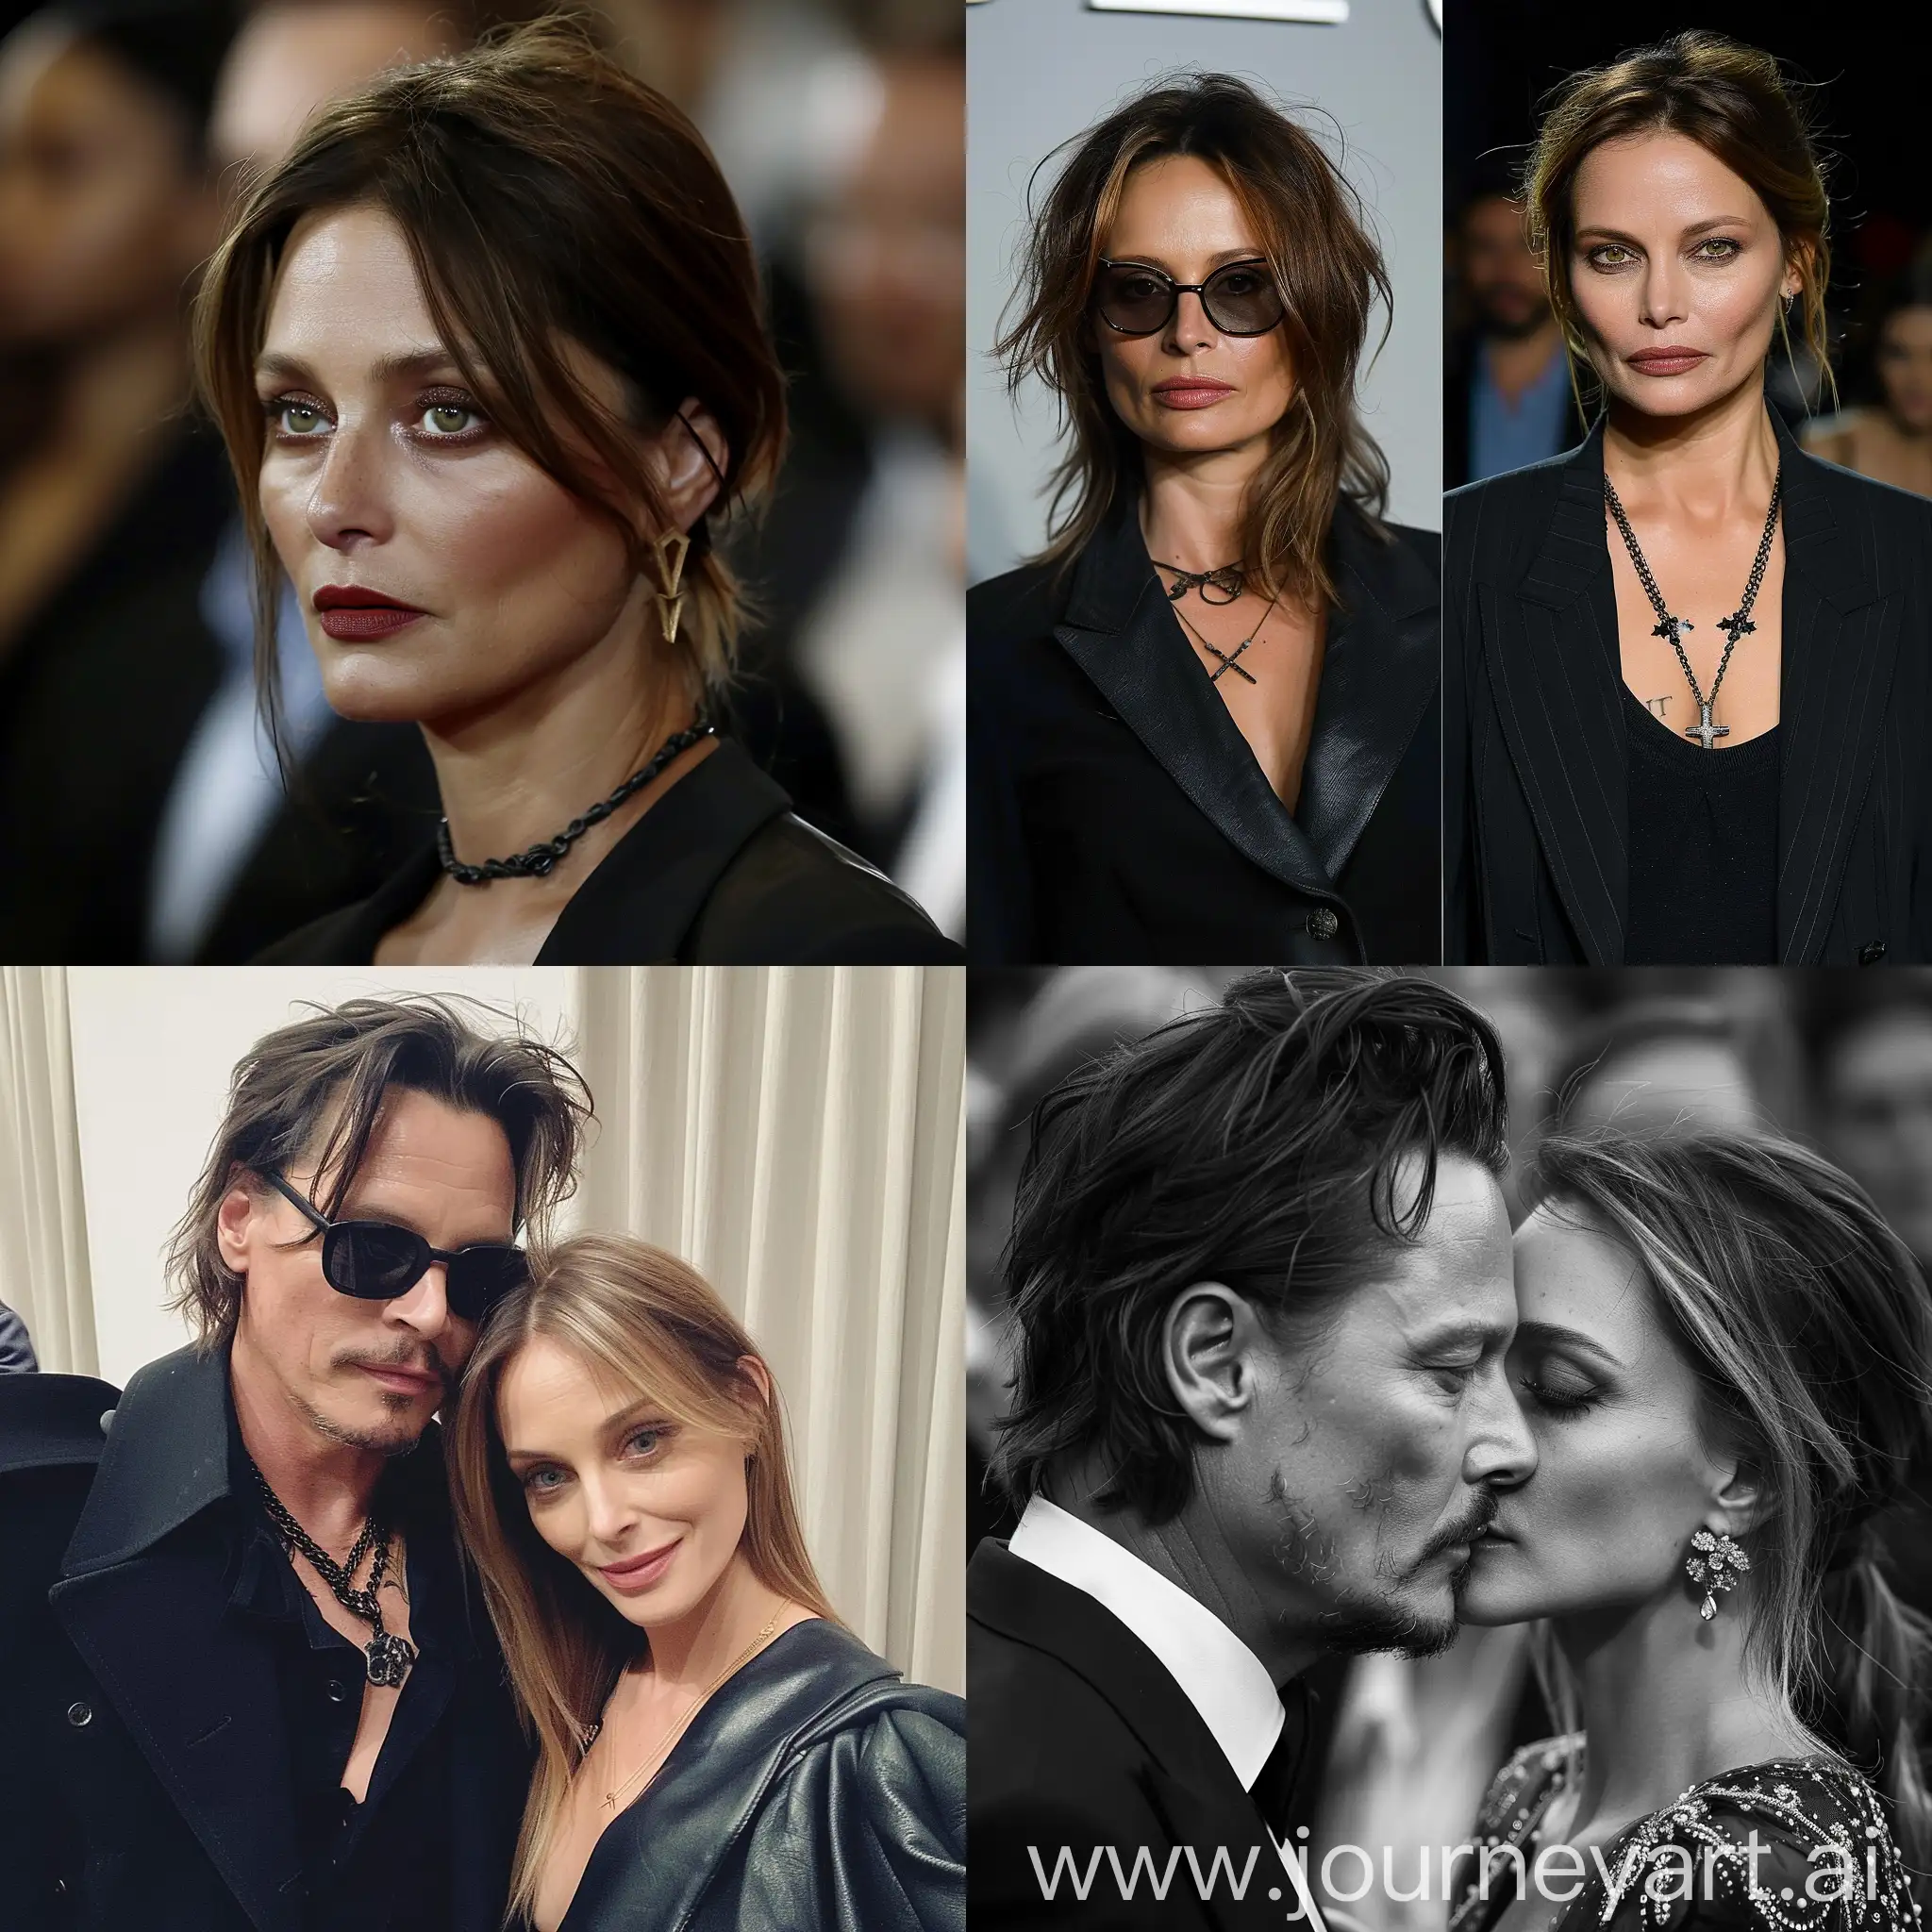 Celebrity-Offspring-Daughter-of-Johnny-Depp-and-Angelina-Jolie-in-a-Glamorous-Portrait